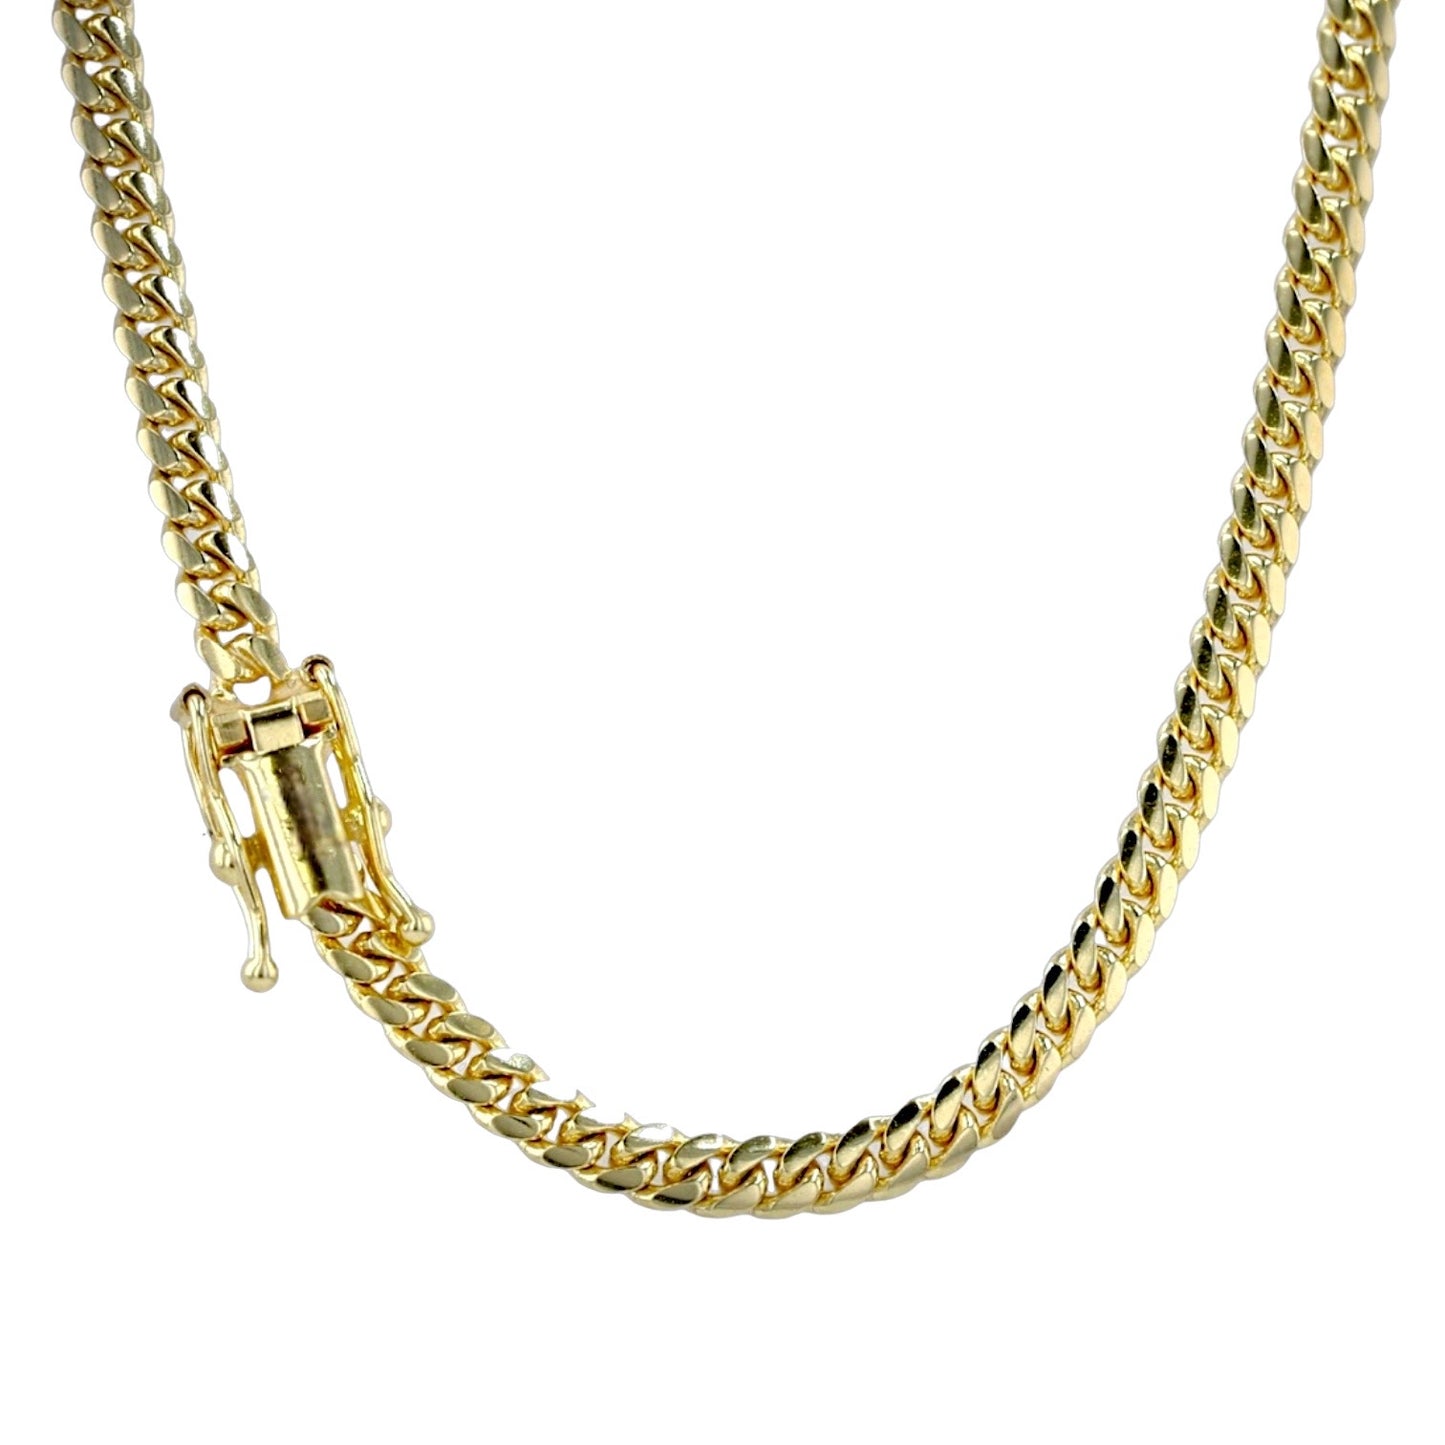 Yellow 18k gold solid baby miami Cuban link chain